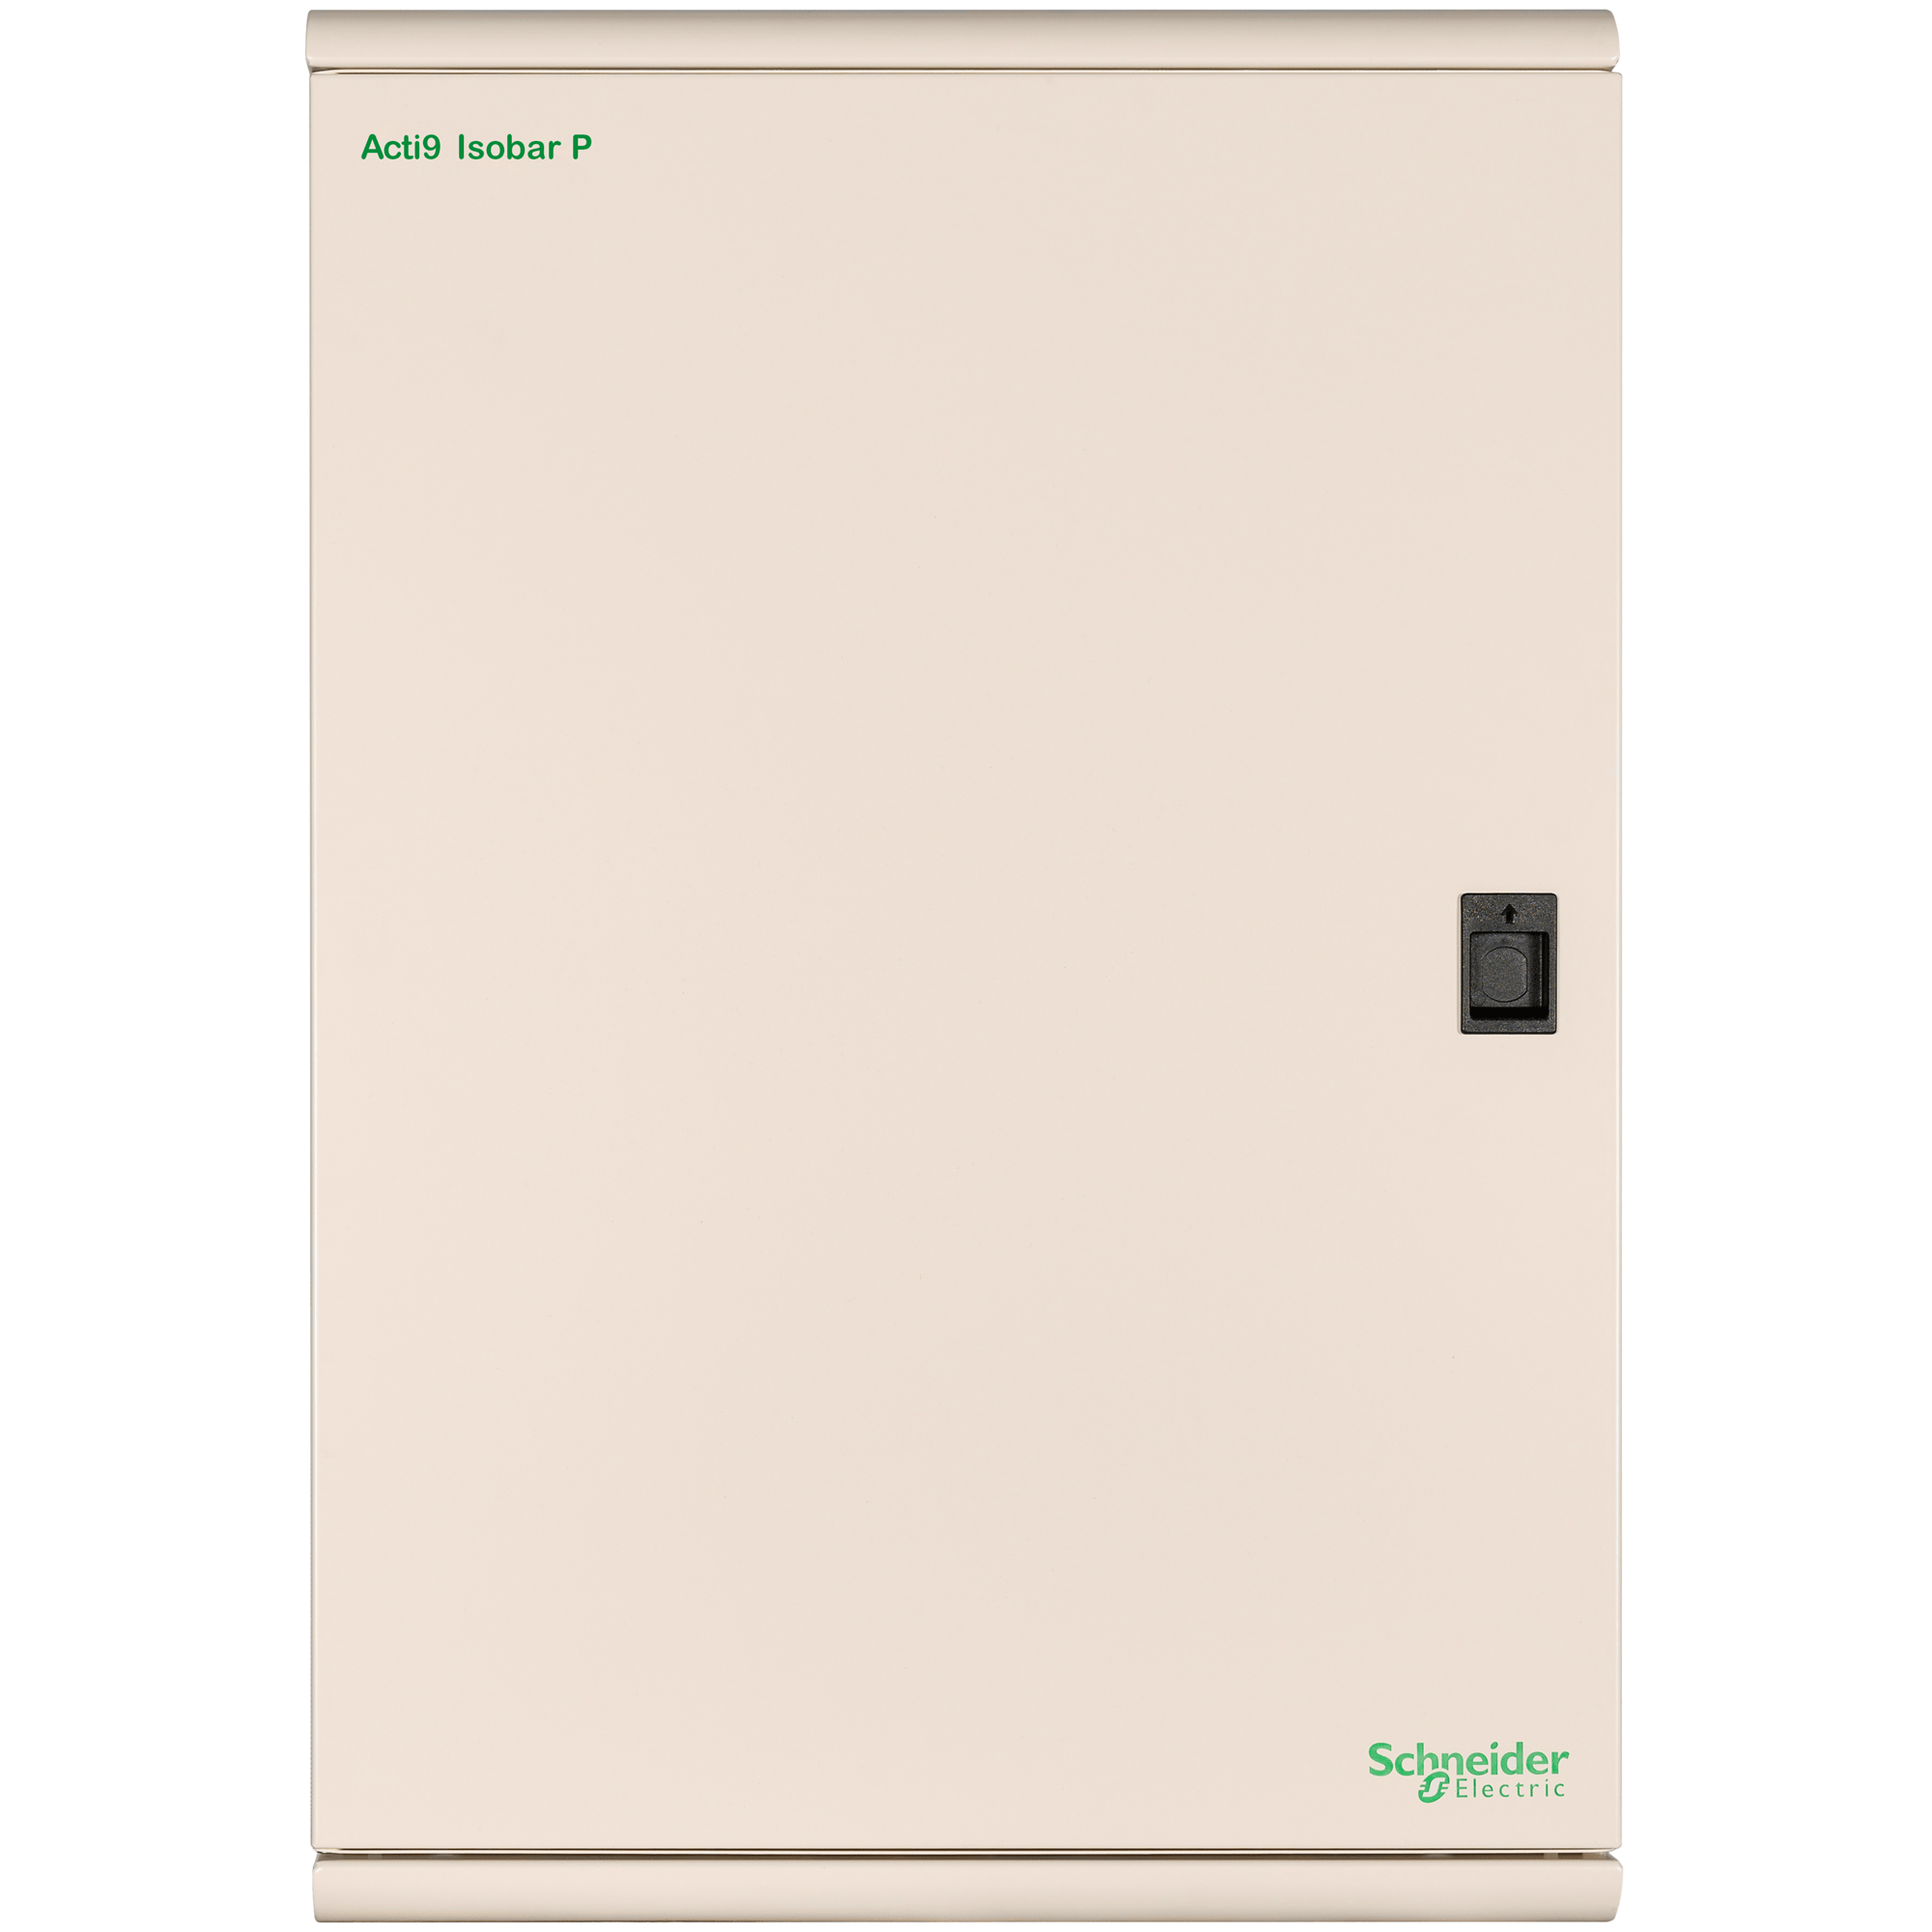 RR Single Phase & Neutral Distribution Board - Efficient Electrical Distribution at Supply Master Electrical Accessories Buy Tools hardware Building materials